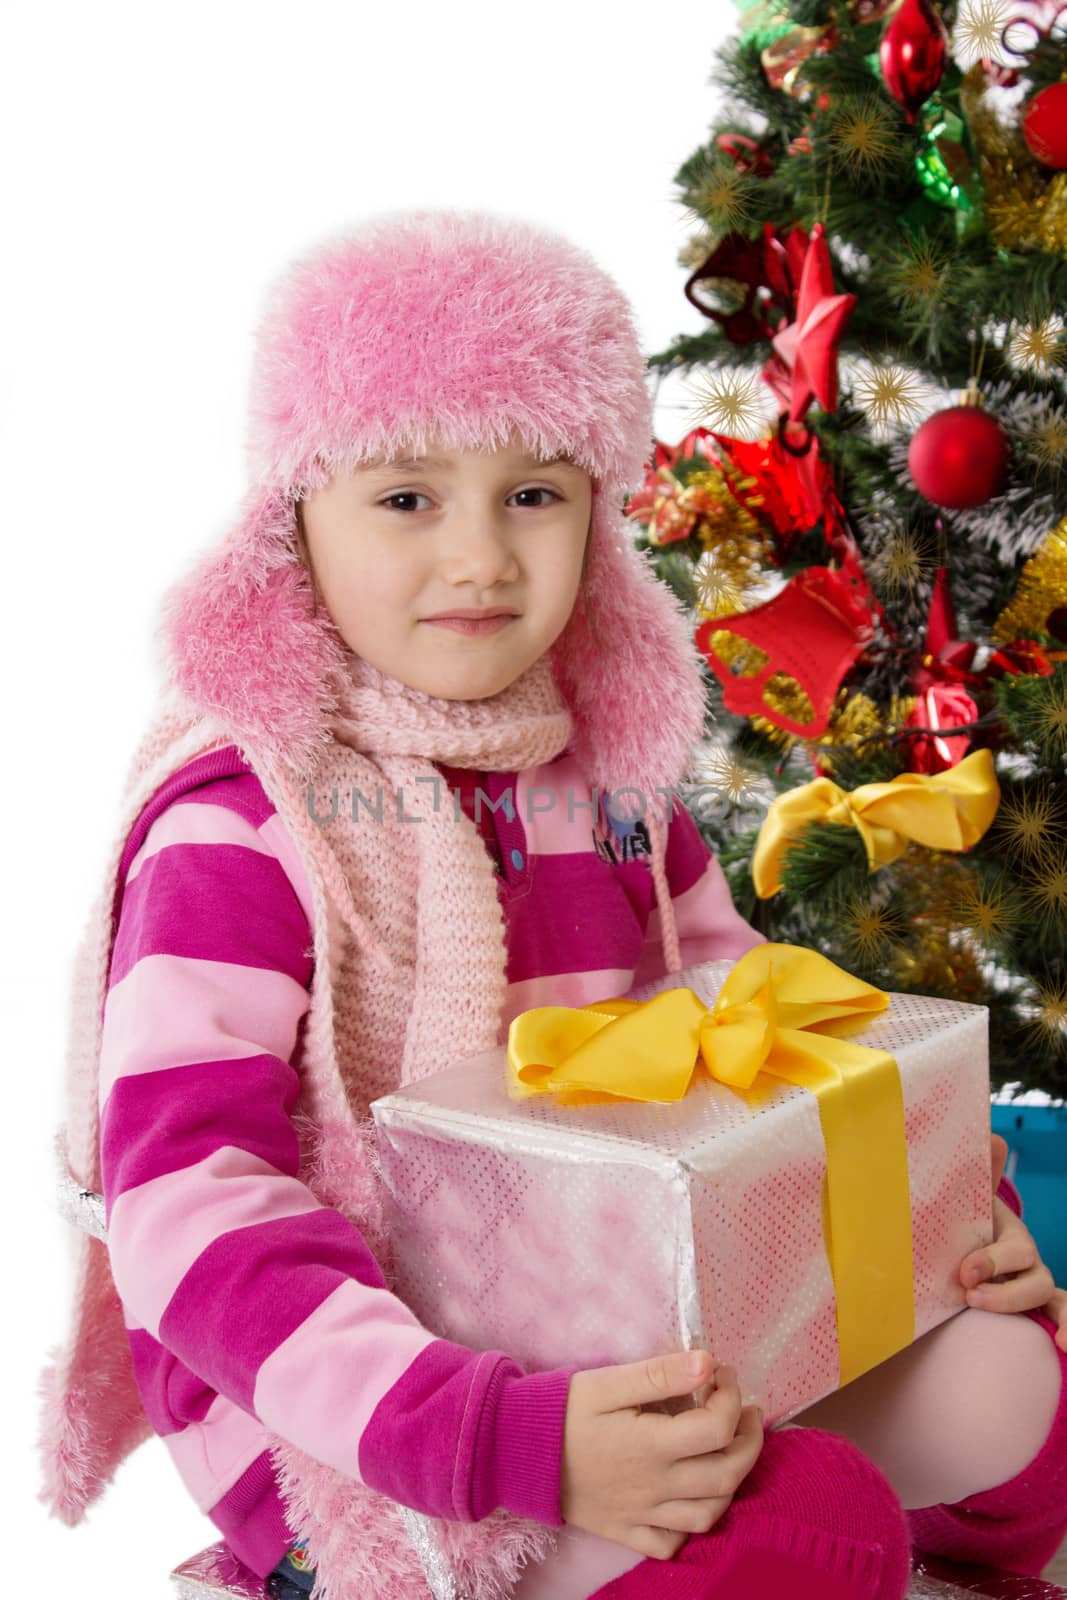 Pretty girl in pink fur hat holding present under Chritmas tree